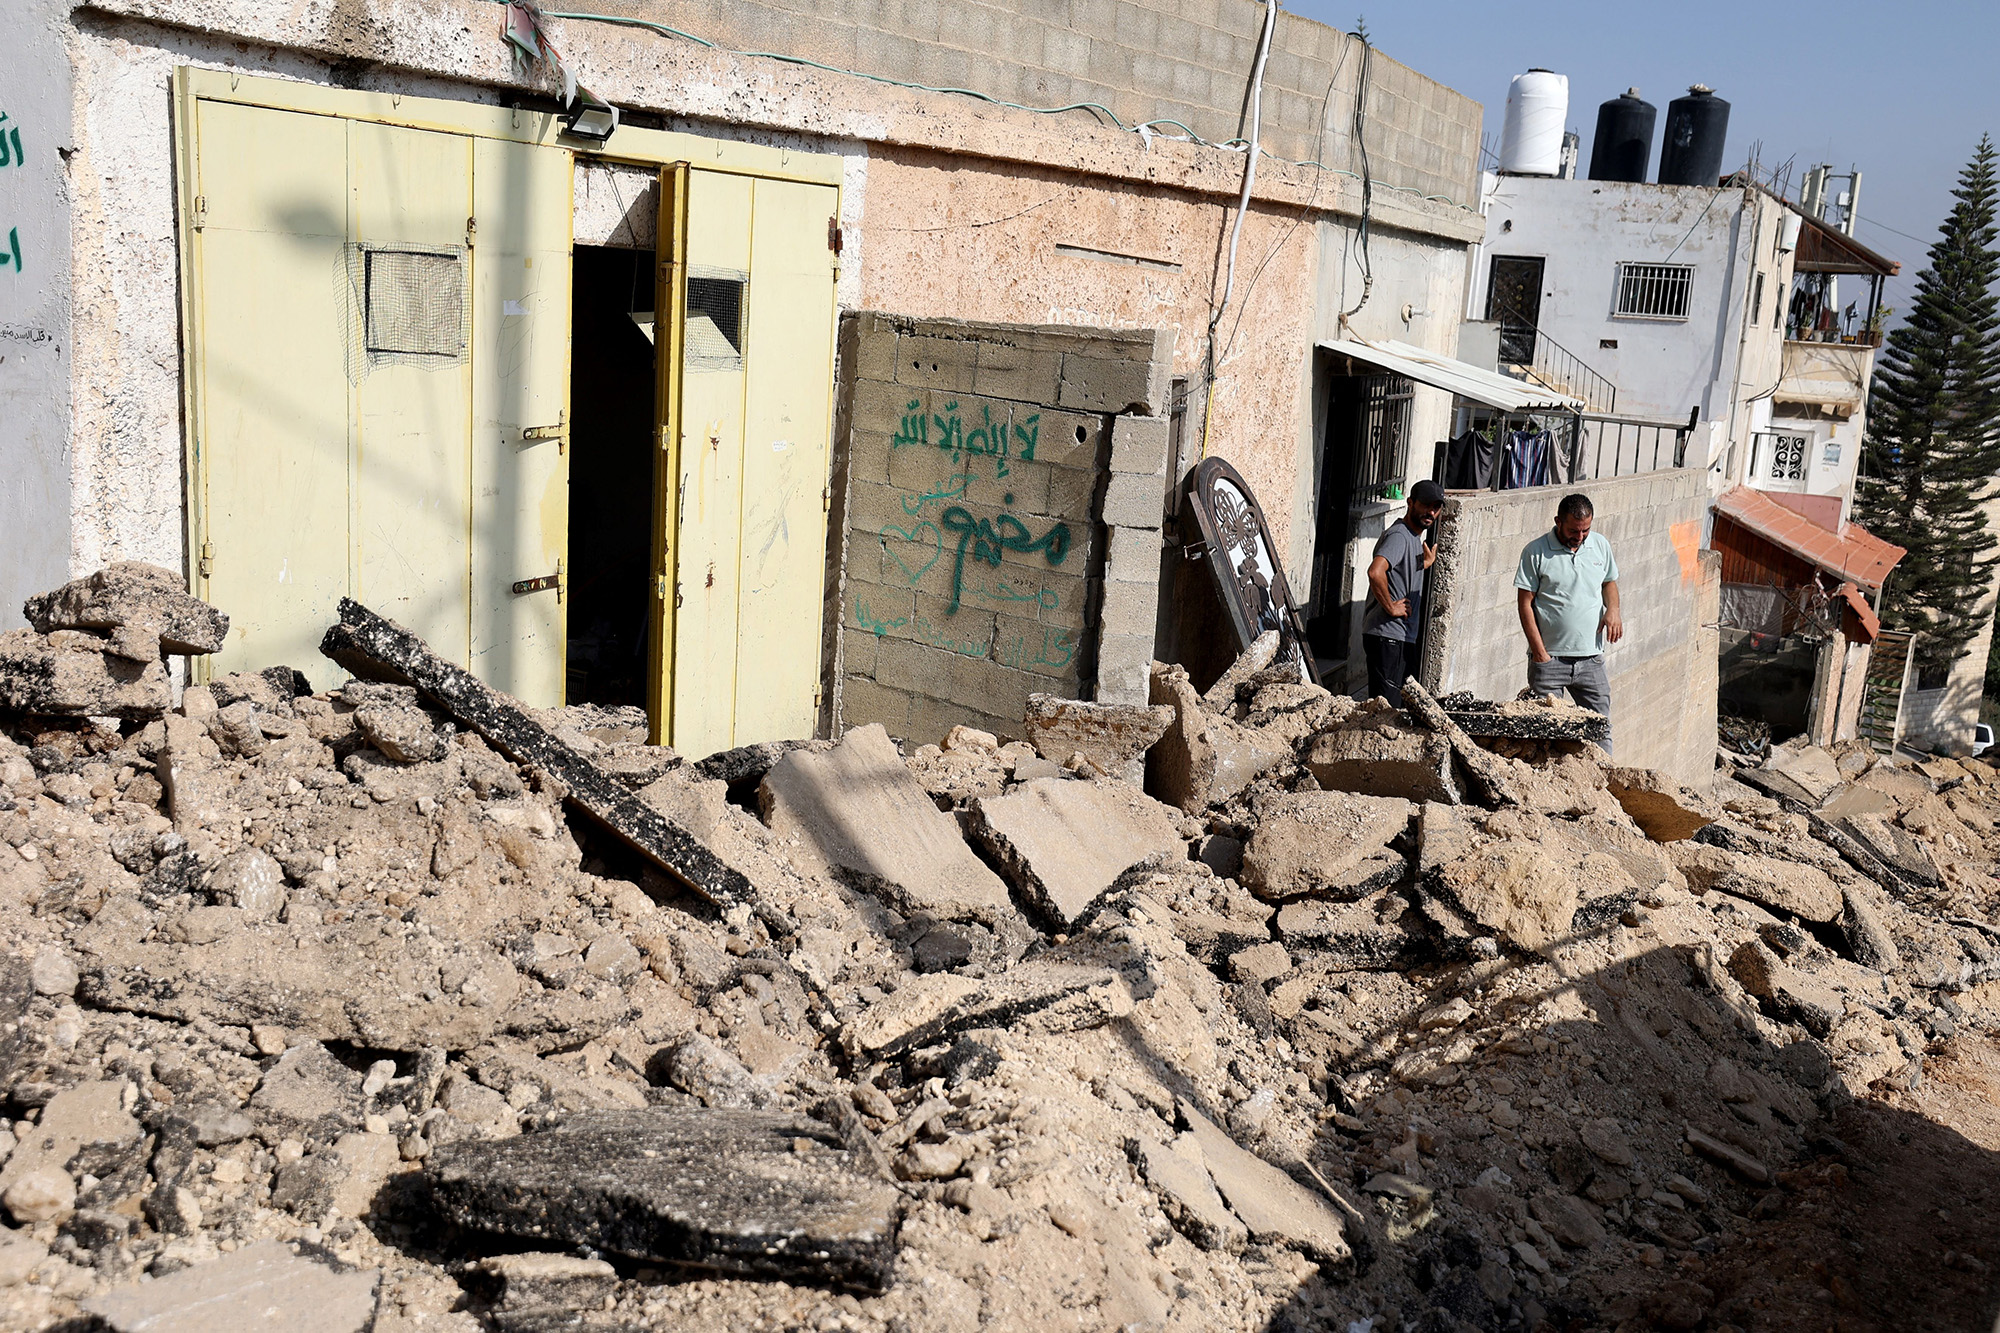 Palestinian men stand outside a building at the edges a road ripped up by an Israeli manned bulldozer during an incursion and clashes in the Jenin refugee camp, West Bank, on November 3.